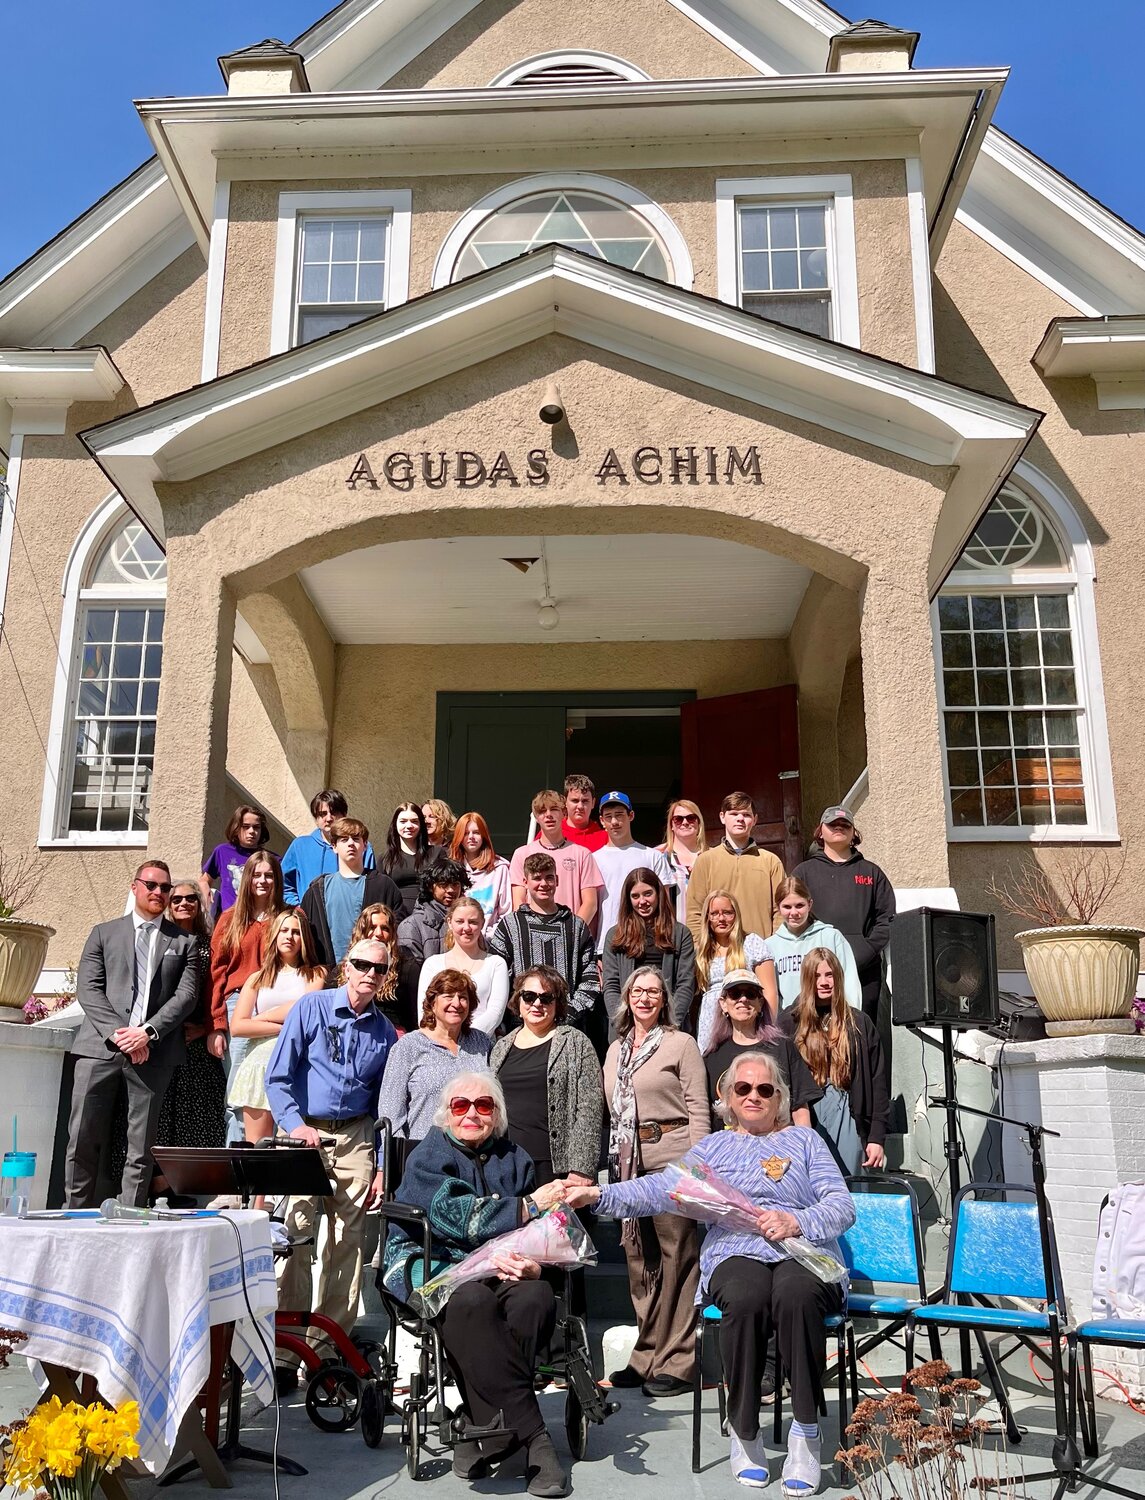 Holocaust survivors Marlene Wertheim,left, and Eva Bocskor, both seated, shared their stories with Livingston Manor high school students and others at the Temple Agudas Achim Daffodil Project garden ceremony.